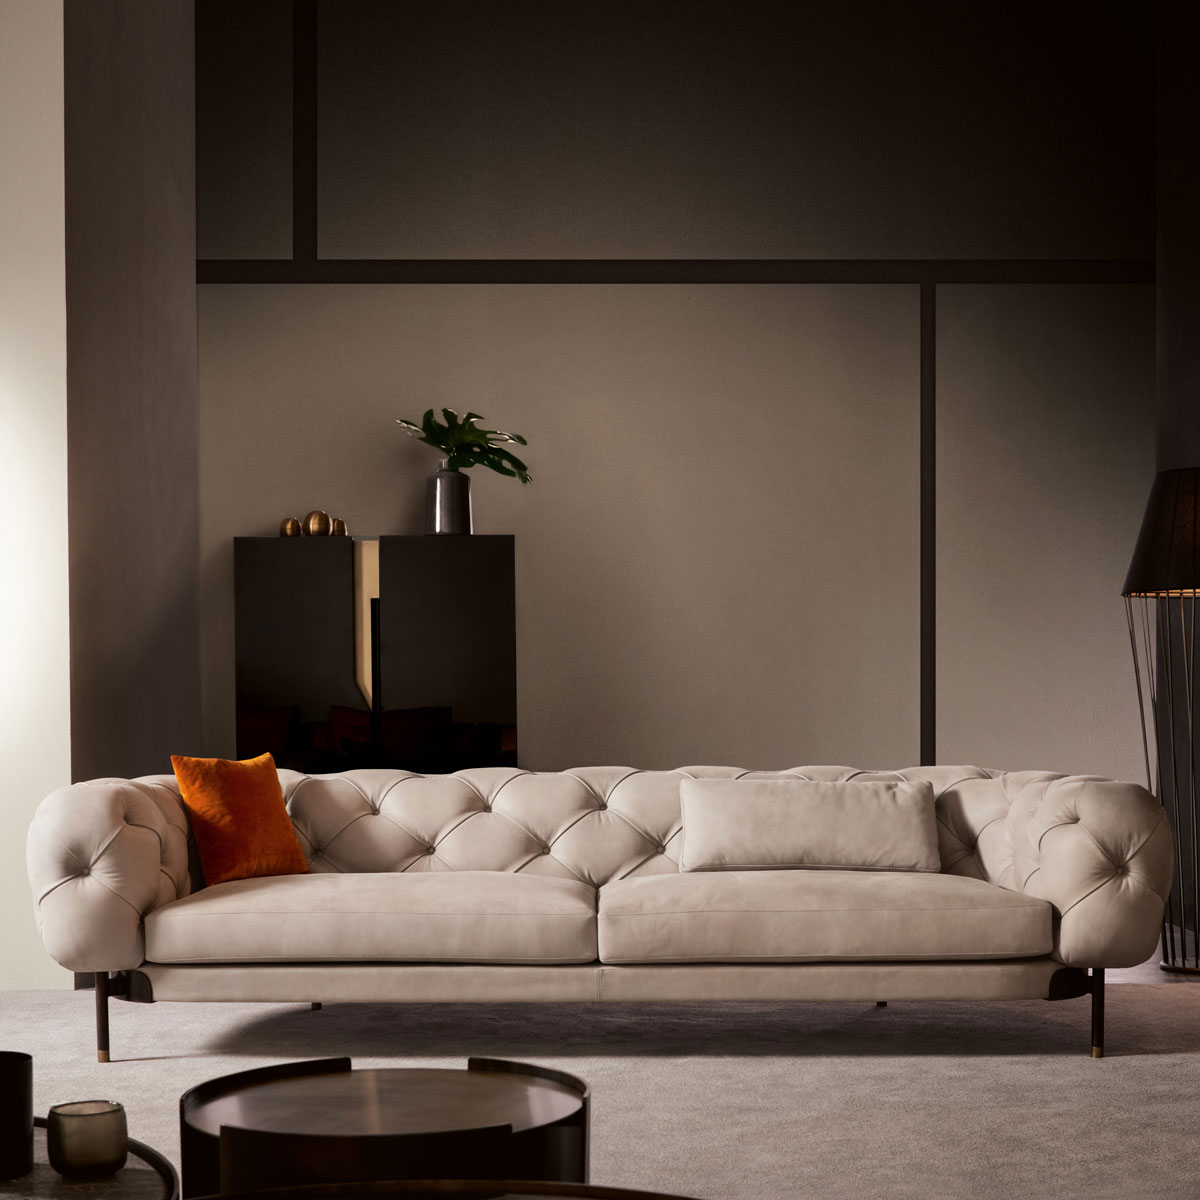 The sofa: the protagonist of the living room - Cantori